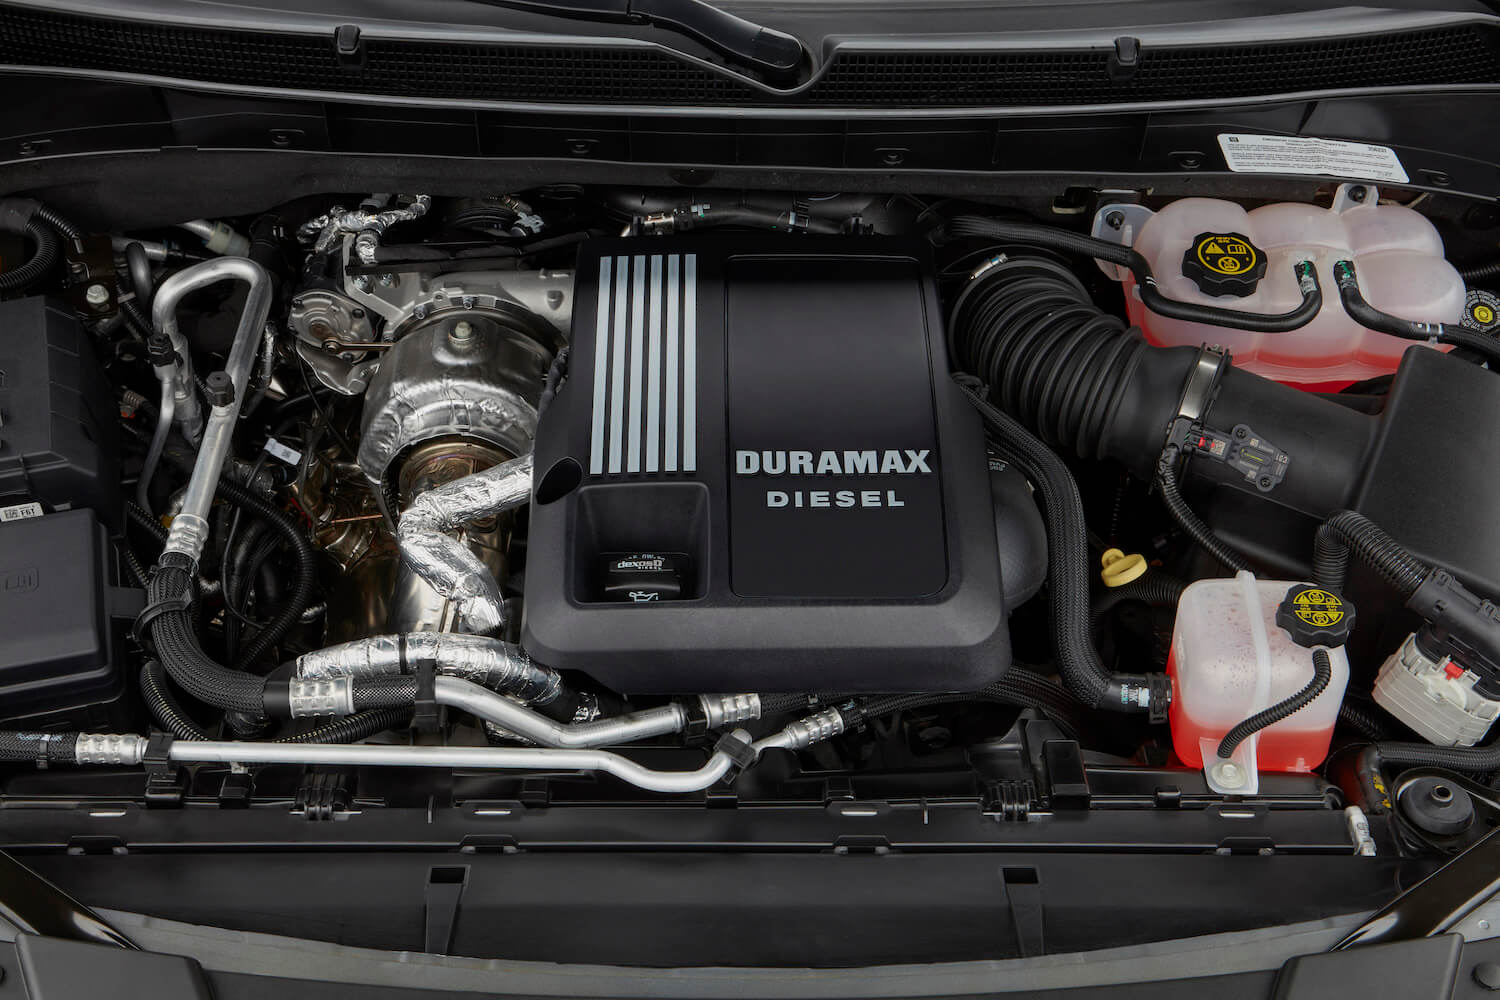 The Duramax 3.0-liter I6 diesel engine under the hood of a 2021 Cadillac Escalade SUV